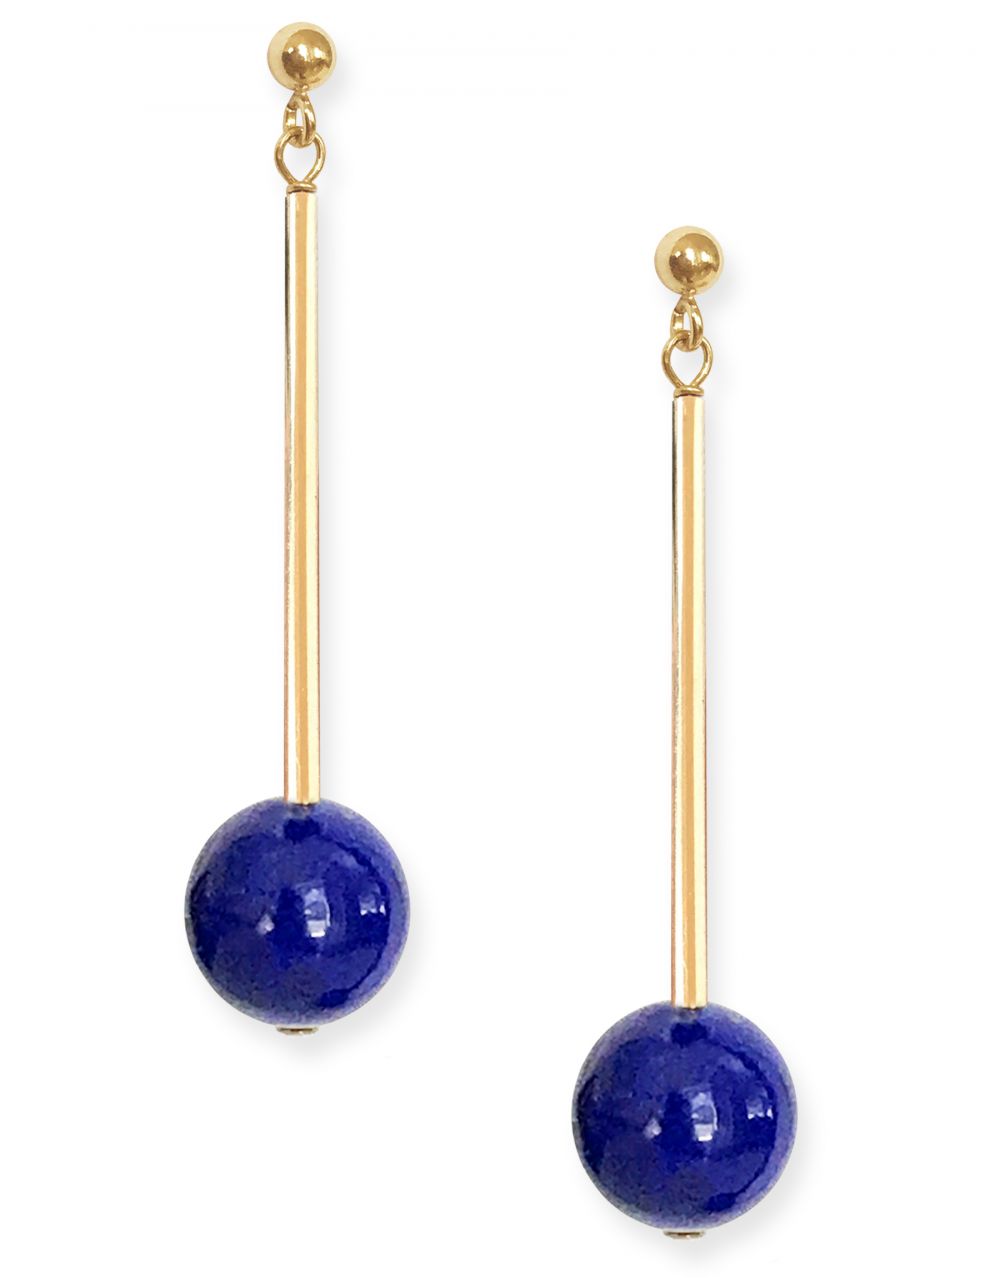 Umbra Earrings<br /><i><small>14K Yellow Gold with Lapis Lazuli</small></i><br /> - Eddera